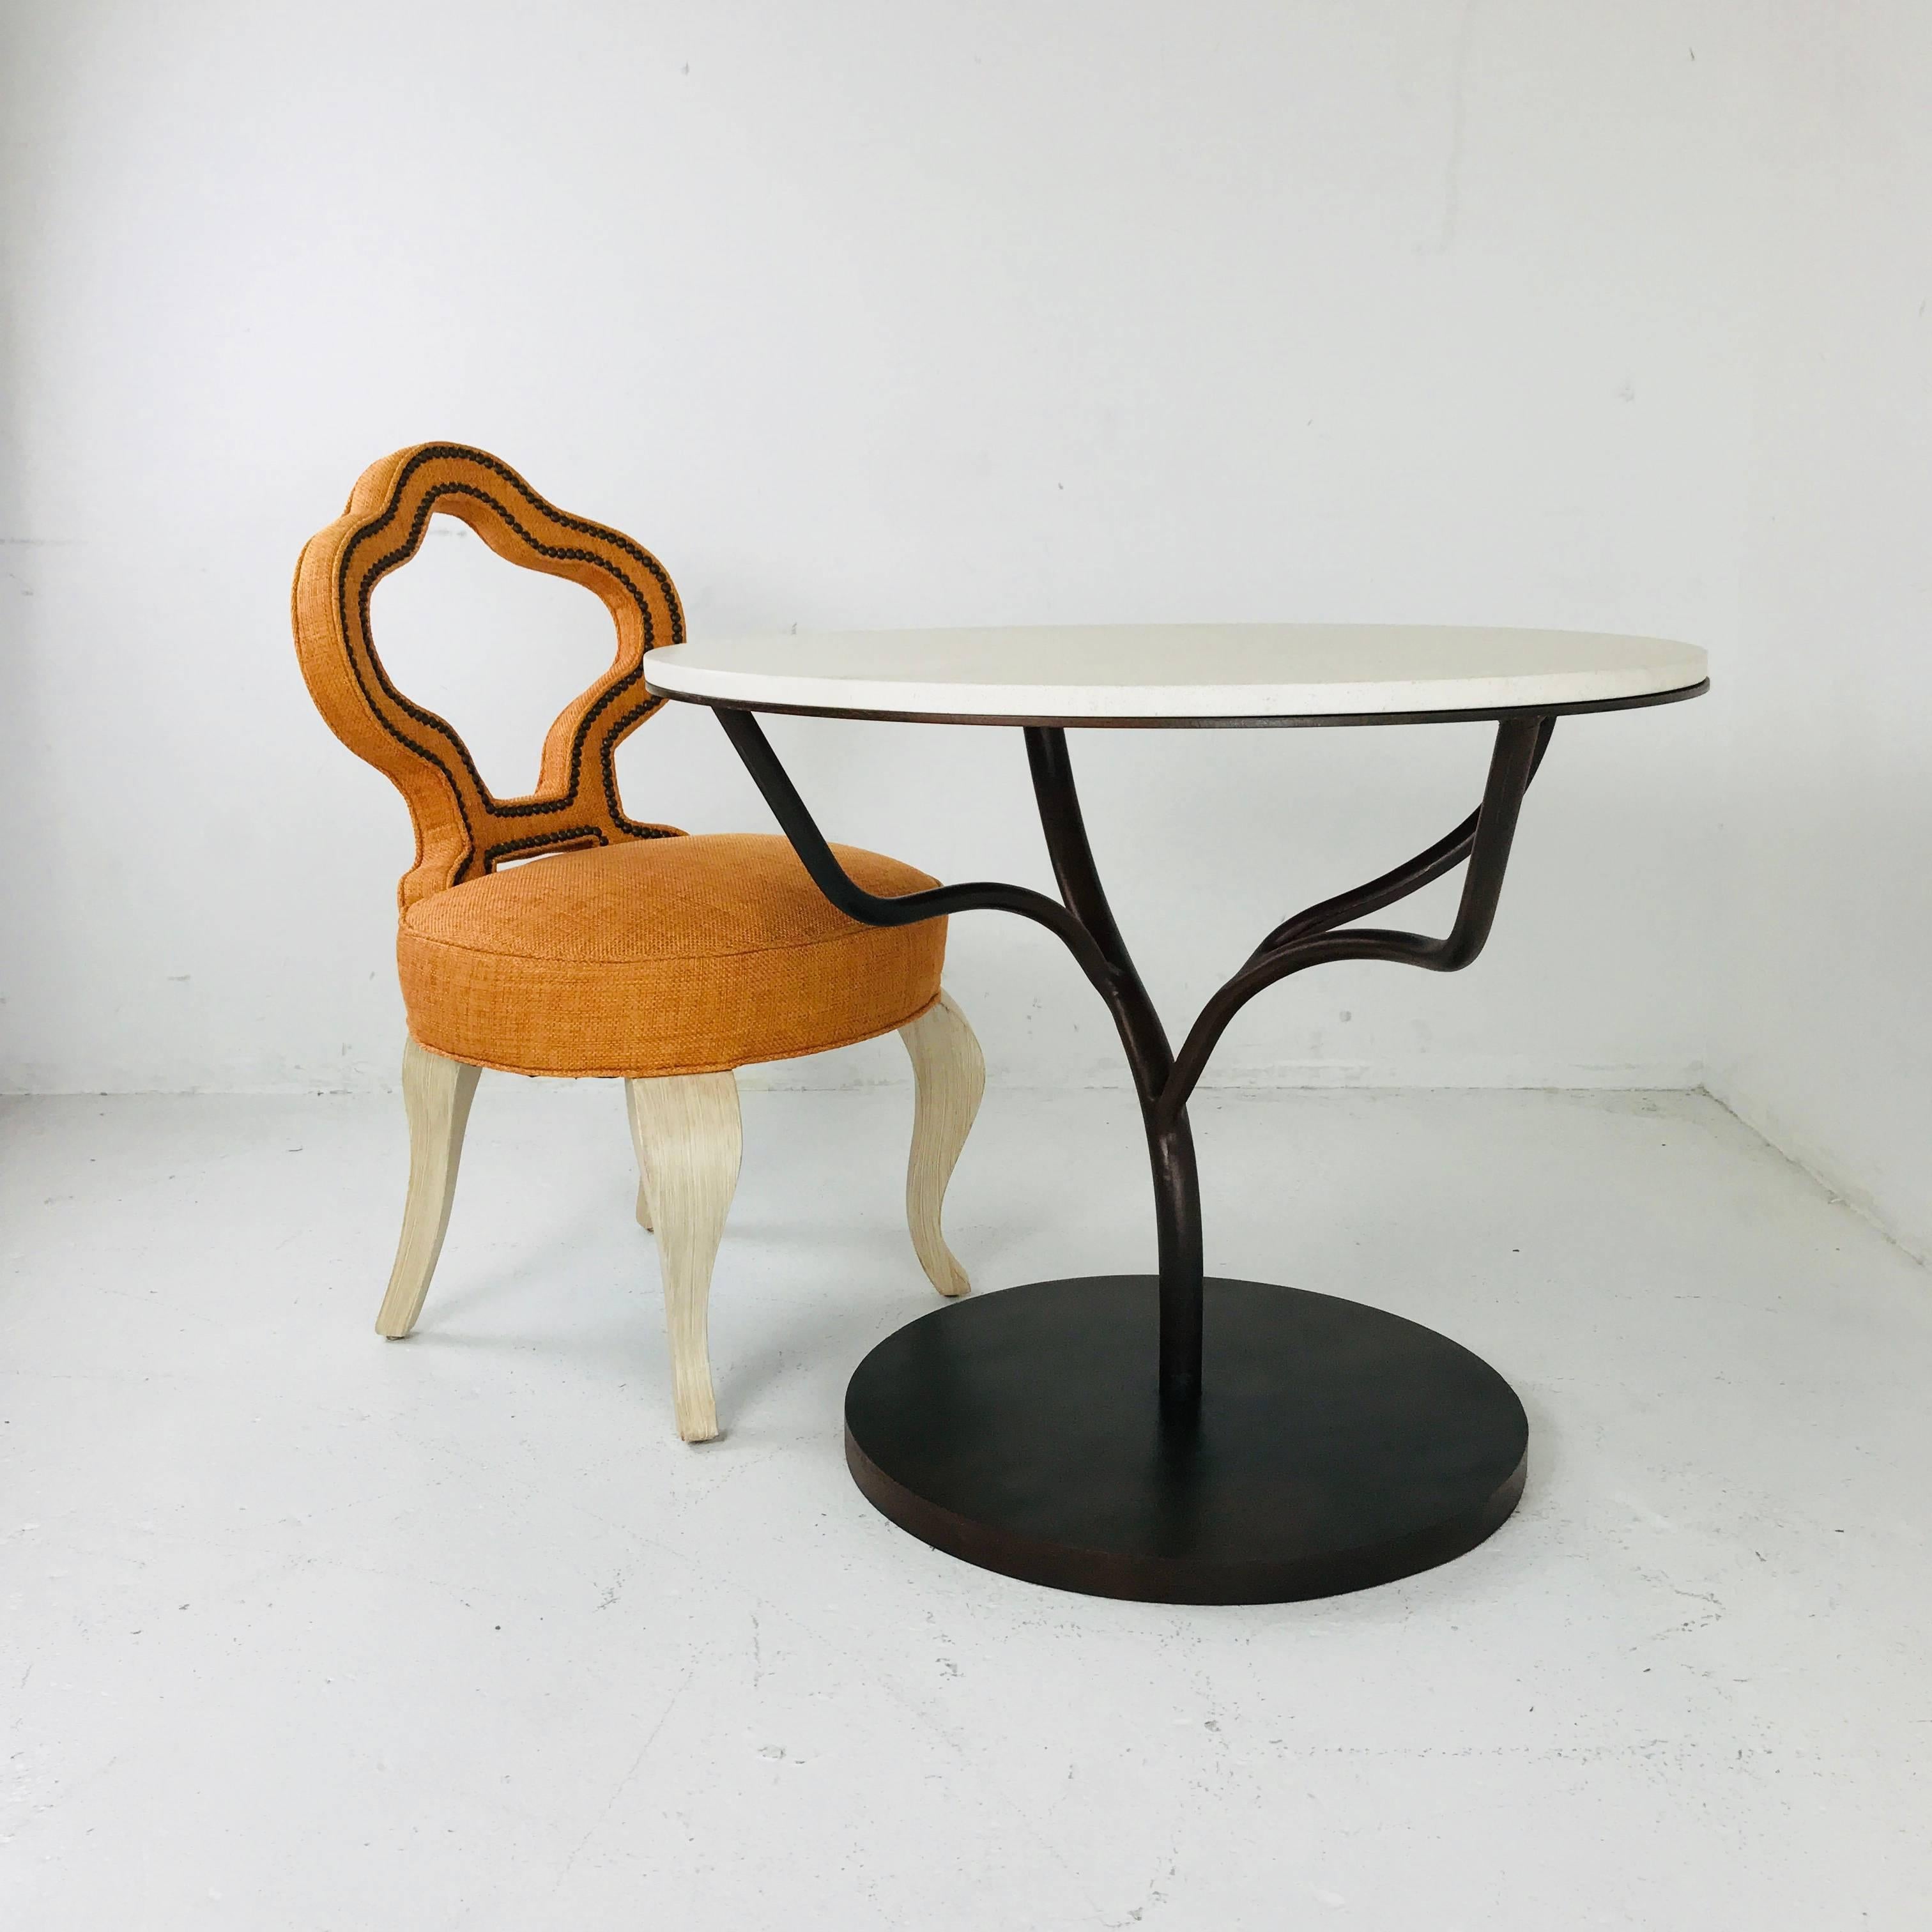 Contemporary Limestone Top Vine Occasional Table with Oxidized Finish